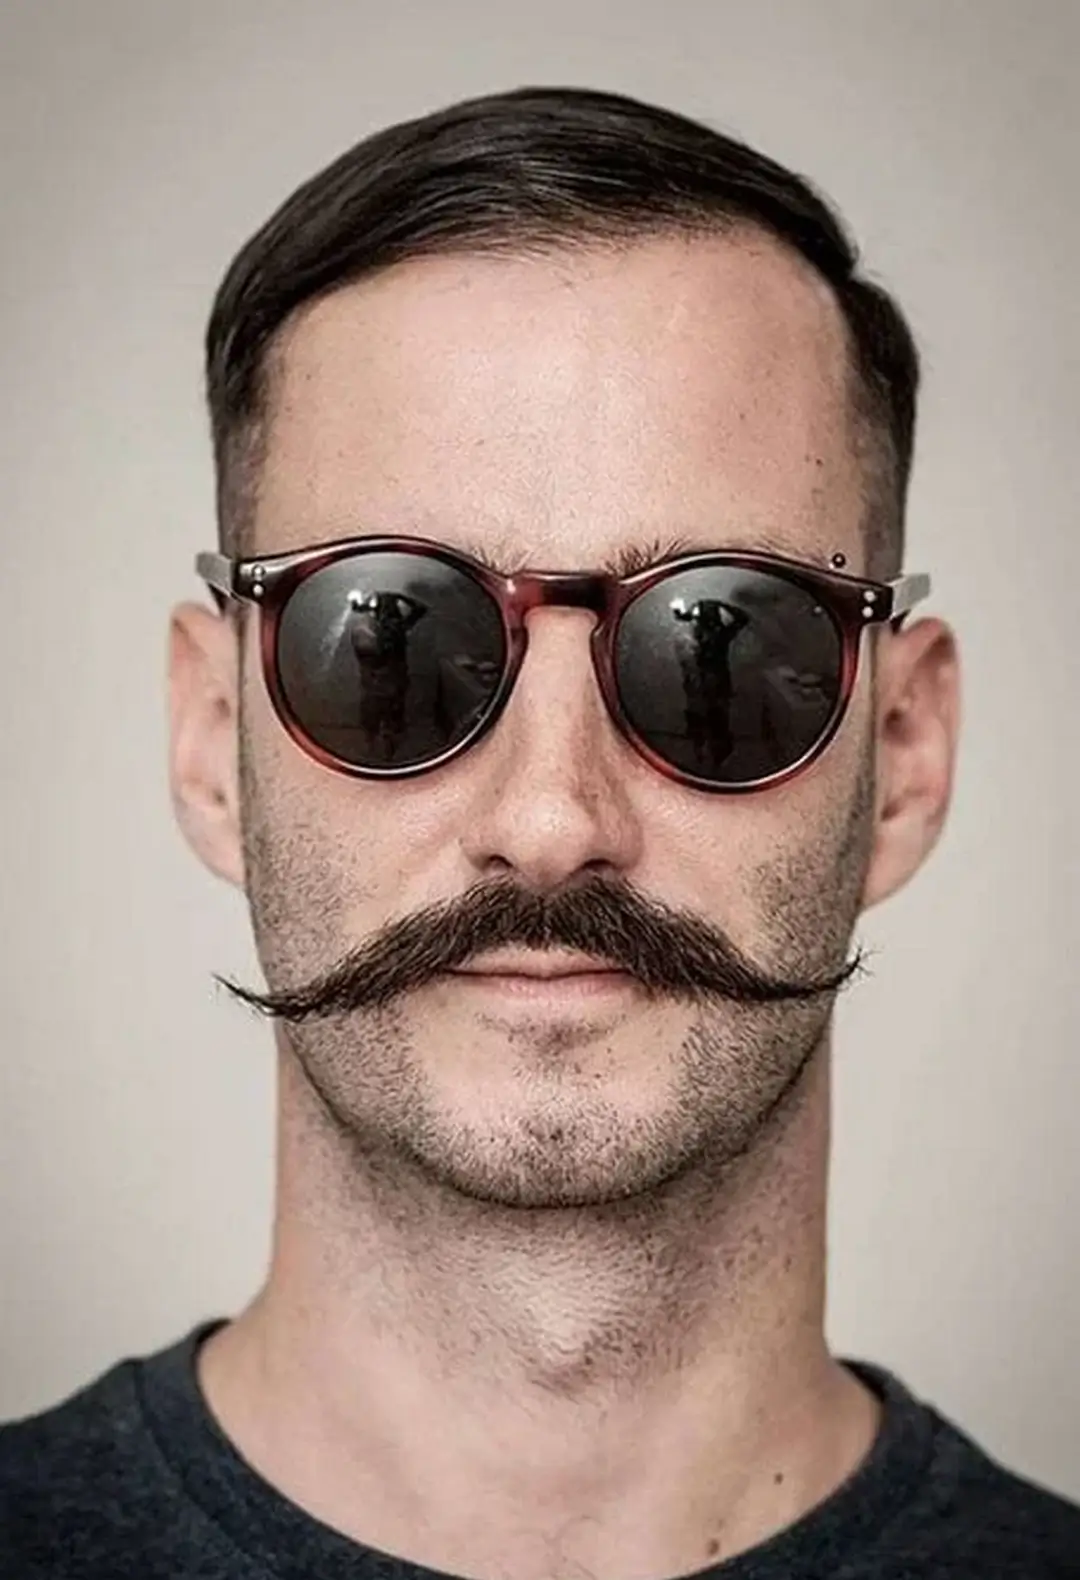 Men's Handlebar Mustache with Short Back and Sides from Fifth Ave Barber Shop in Midtown NYC